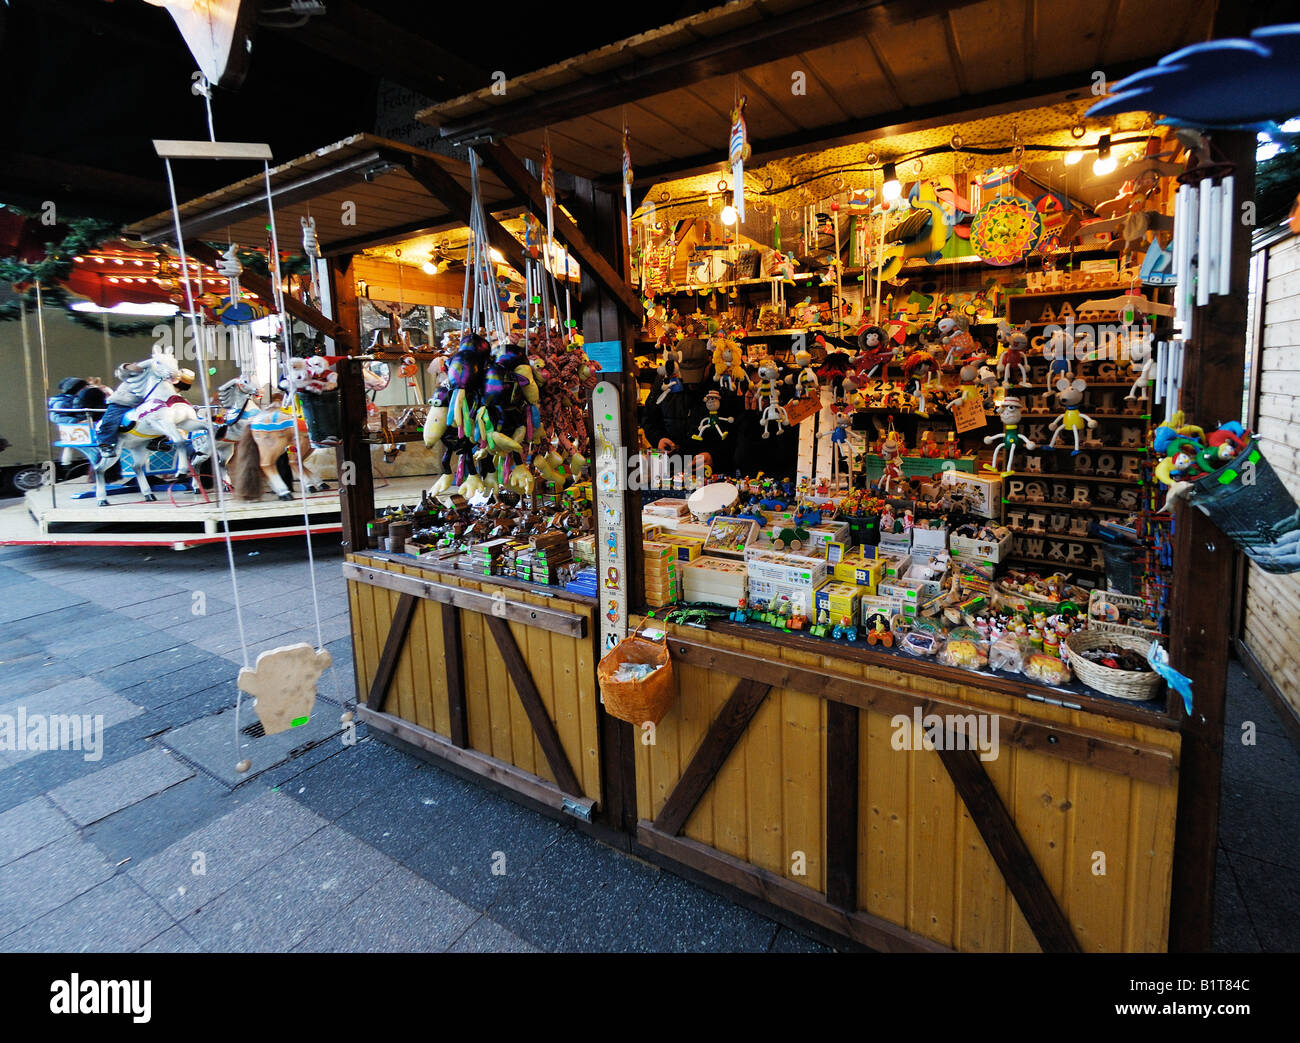 handcrafted decoration objects on display in stall on Christmas market in Duesseldorf Germany Stock Photo